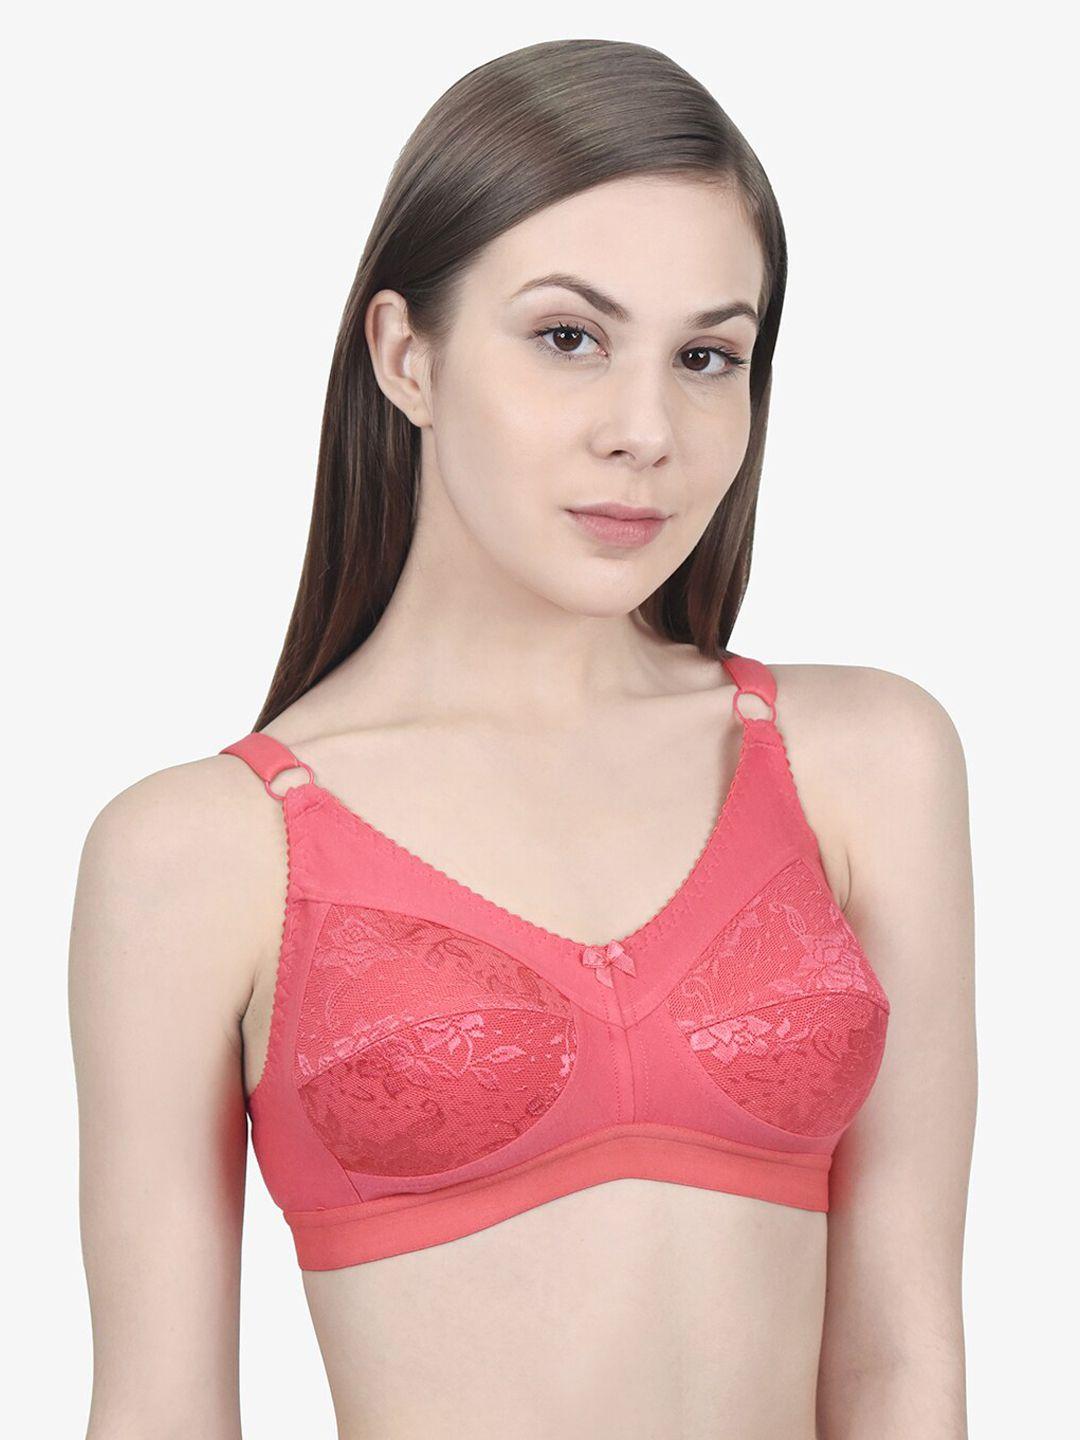 innocence-coral-pink-lace-non-wired-non-padded-minimizer-bra-bbaplin90163_28b